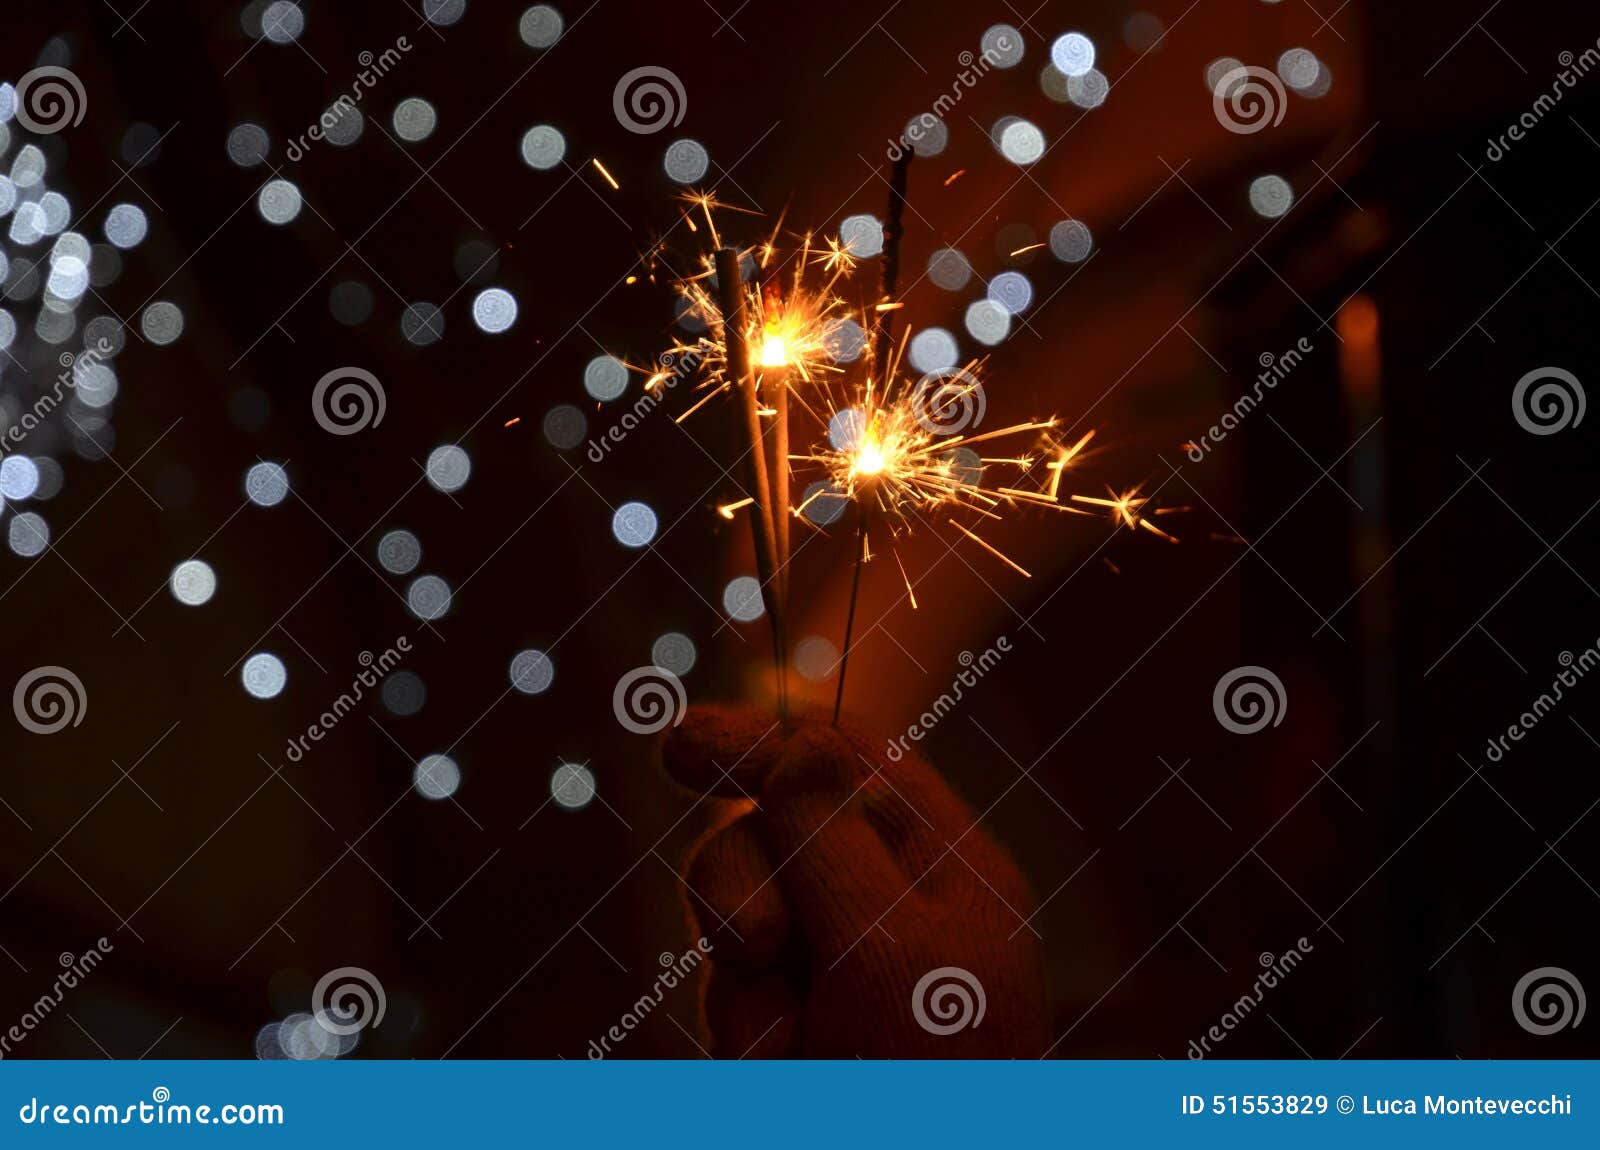 new years eve celebration with hand held sparkler fireworks